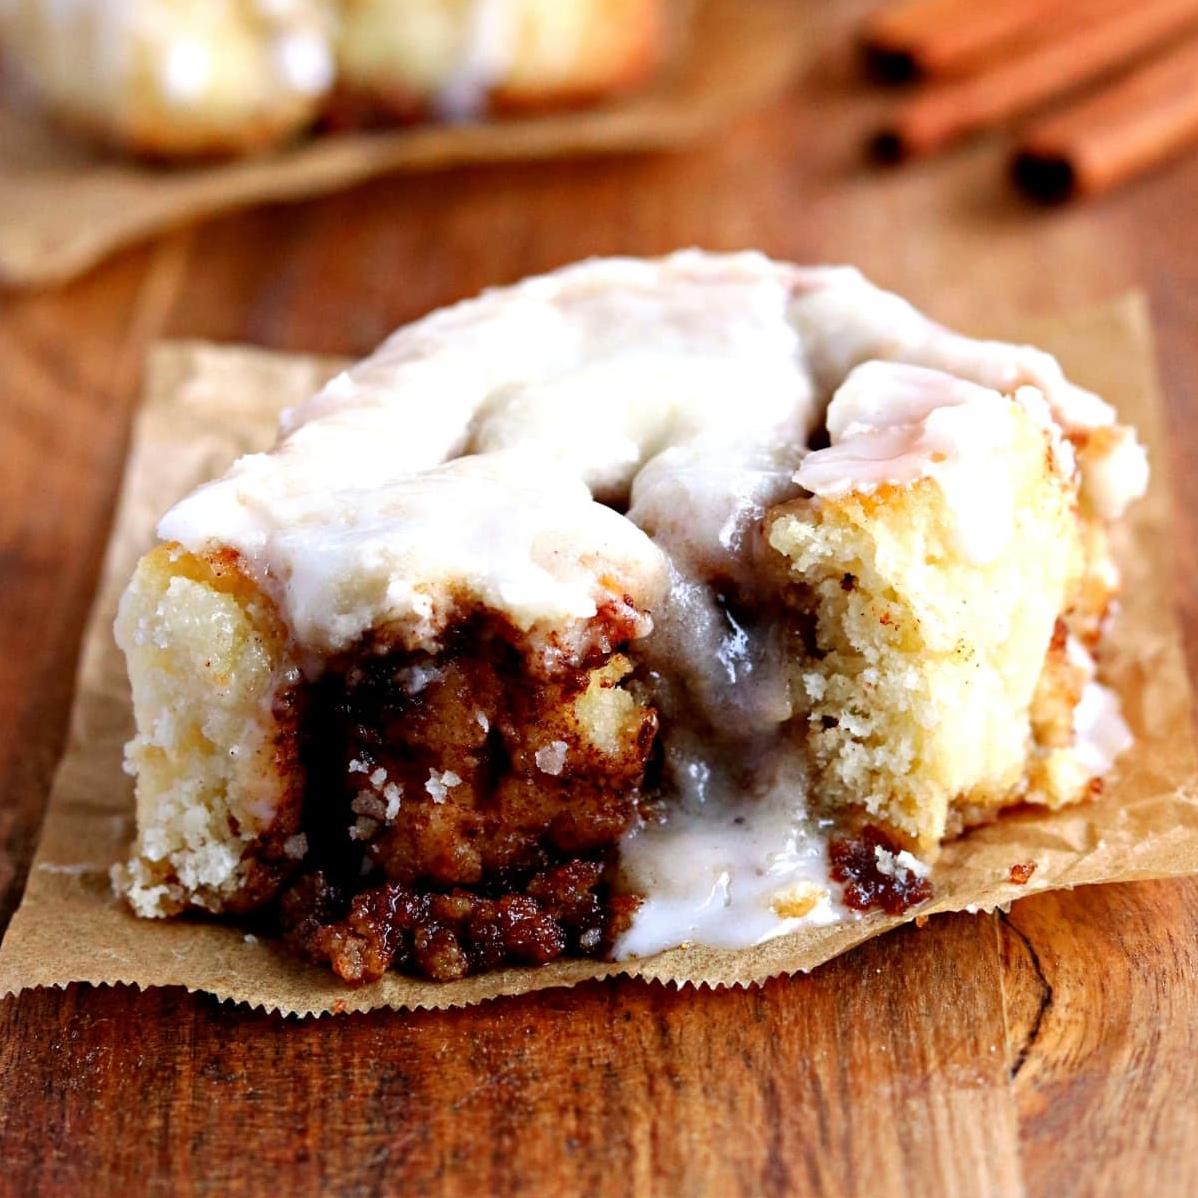  A sprinkling of cinnamon sugar on top gives these muffins that classic cinnamon bun flavor.